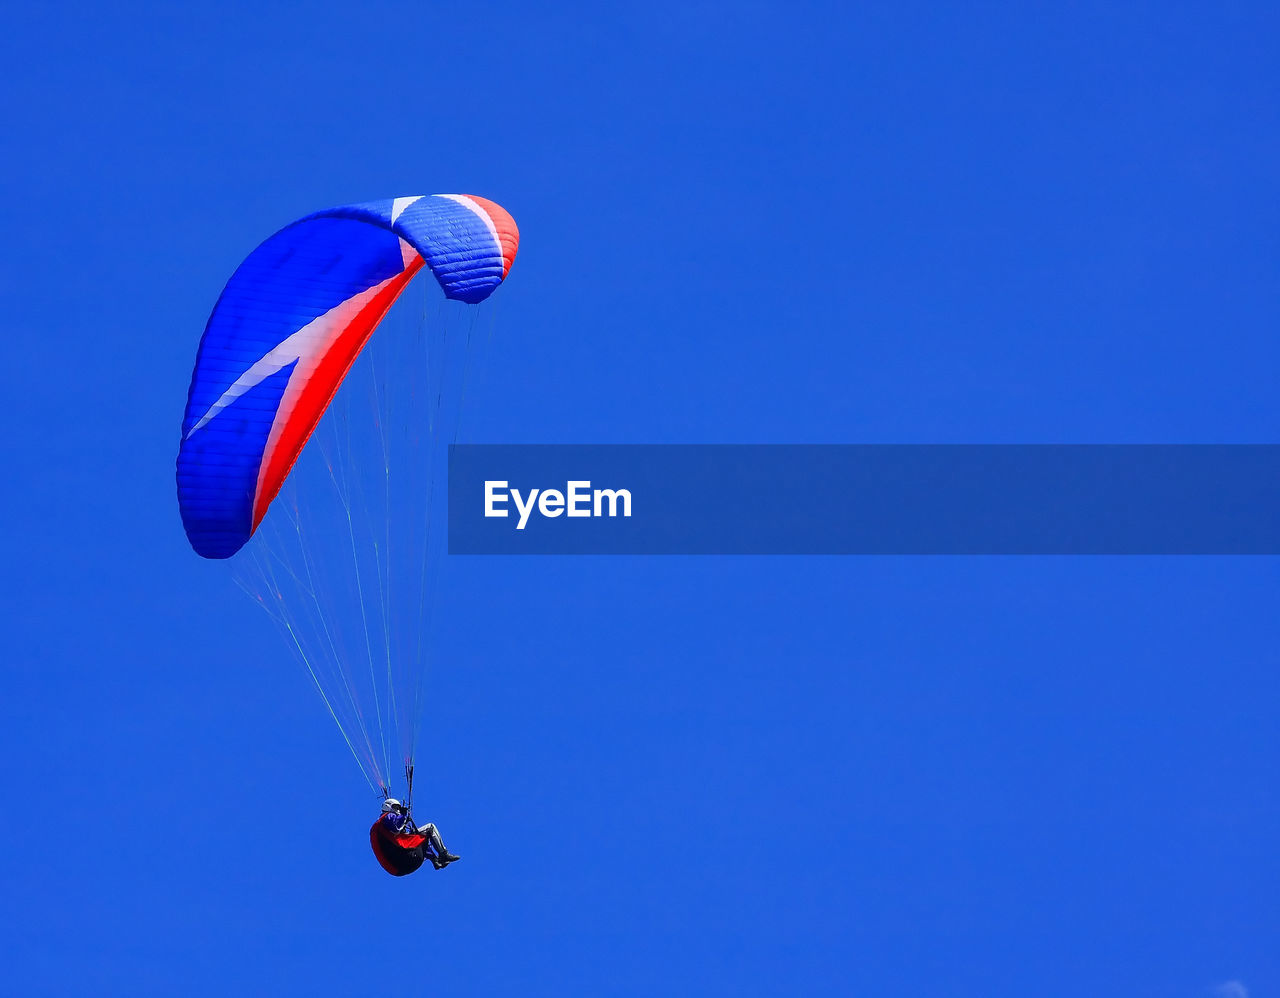 Low angle view of person paragliding against clear blue sky 